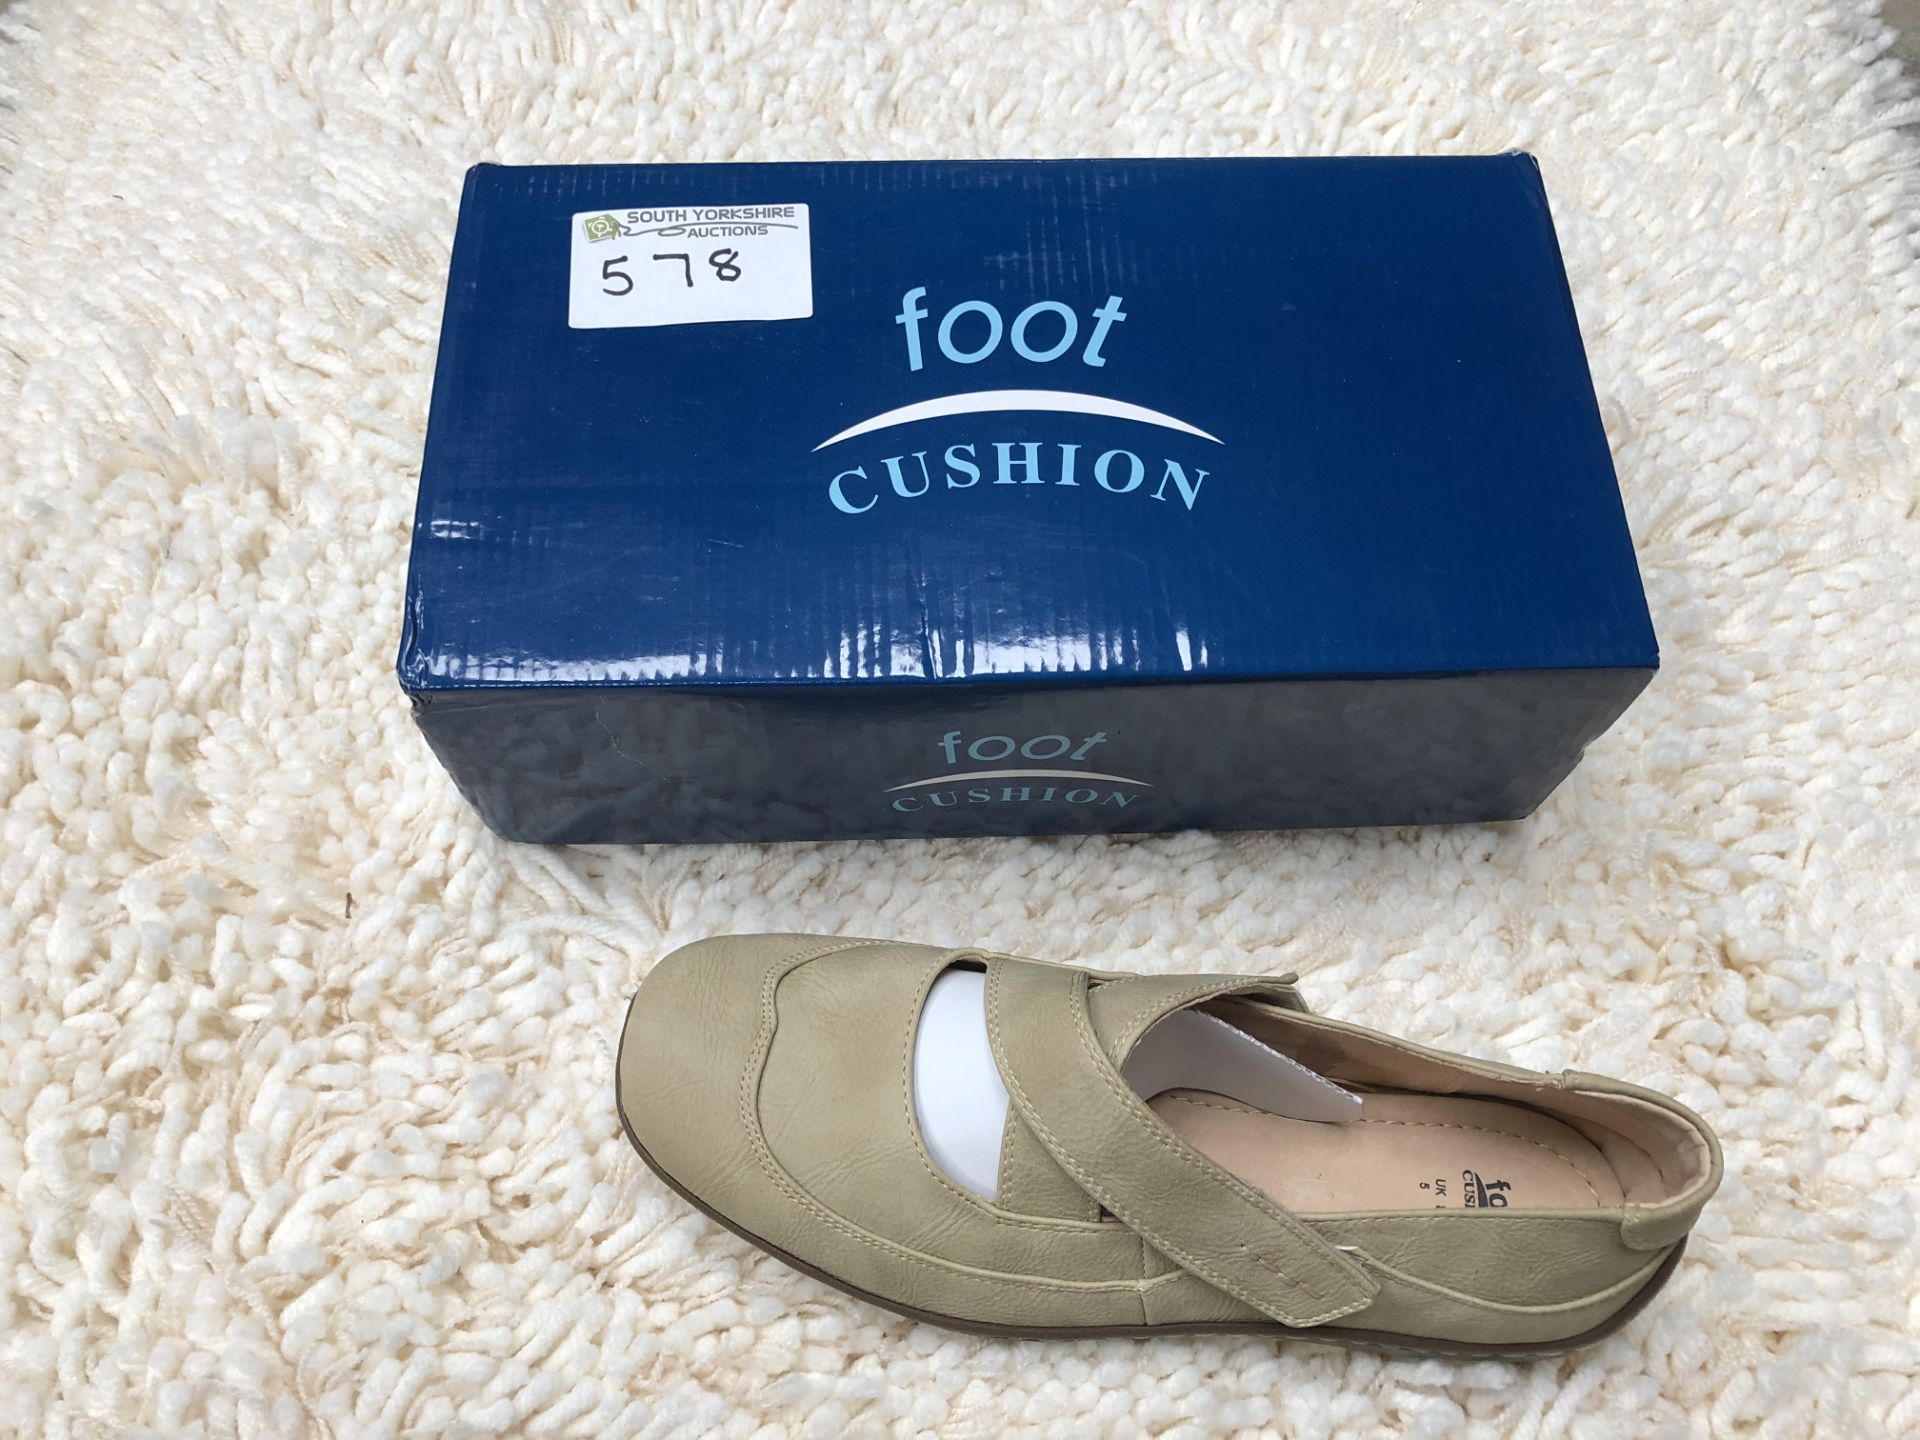 Foot Cushion, Size 5, Beige Shoe, New and Boxed